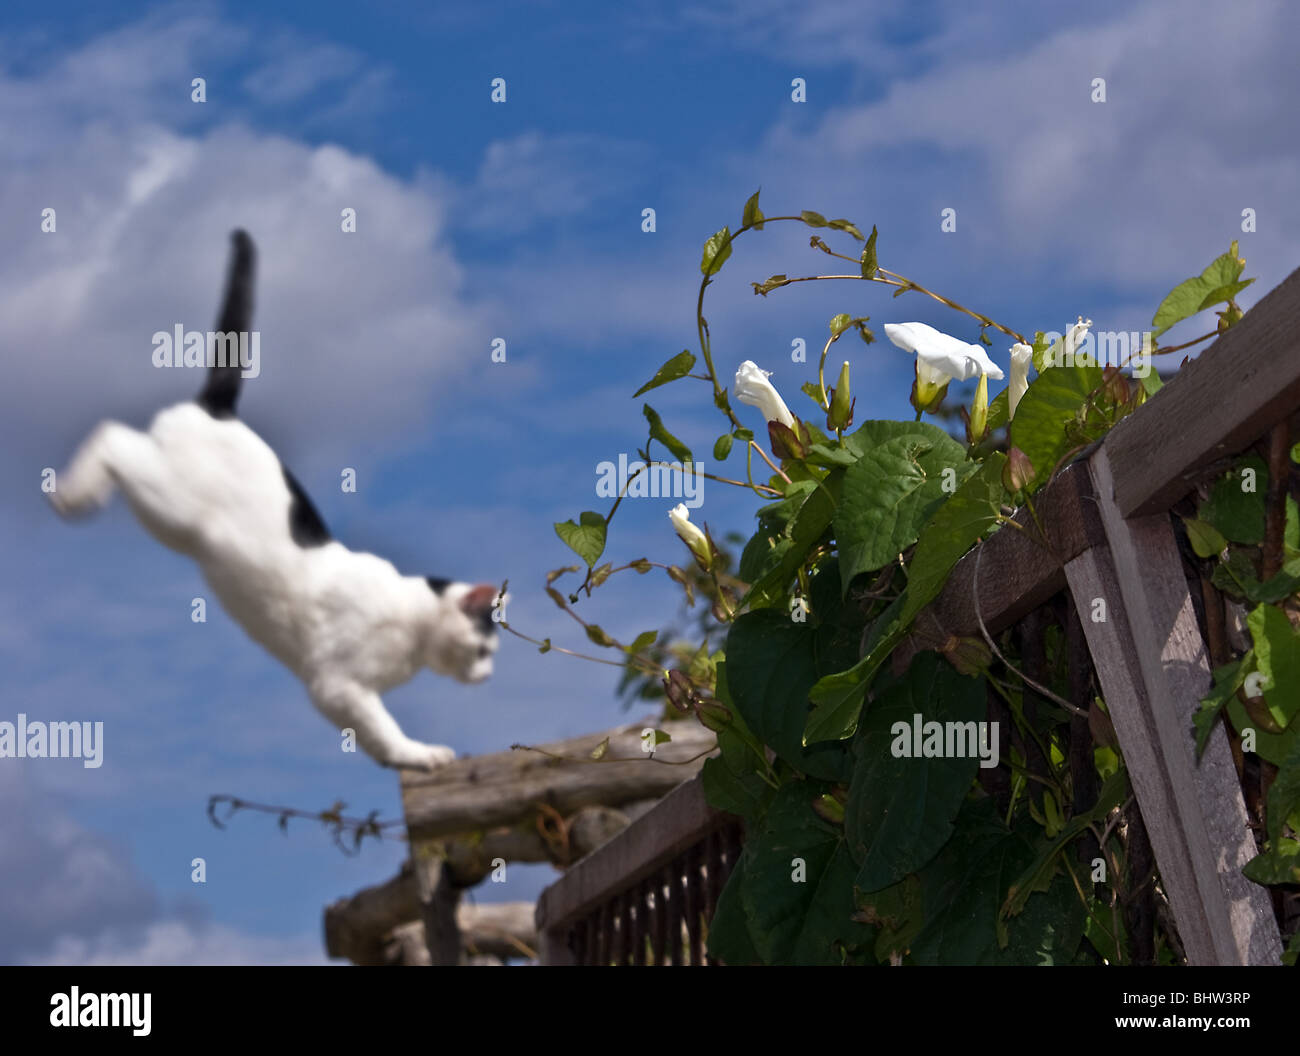 BLACK AND WHITE CAT IN MID AIR LEAPING FROM A ROOF ONTO A FENCE WHICH IS COVERED IN MORNING GLORY FLOWERS Stock Photo